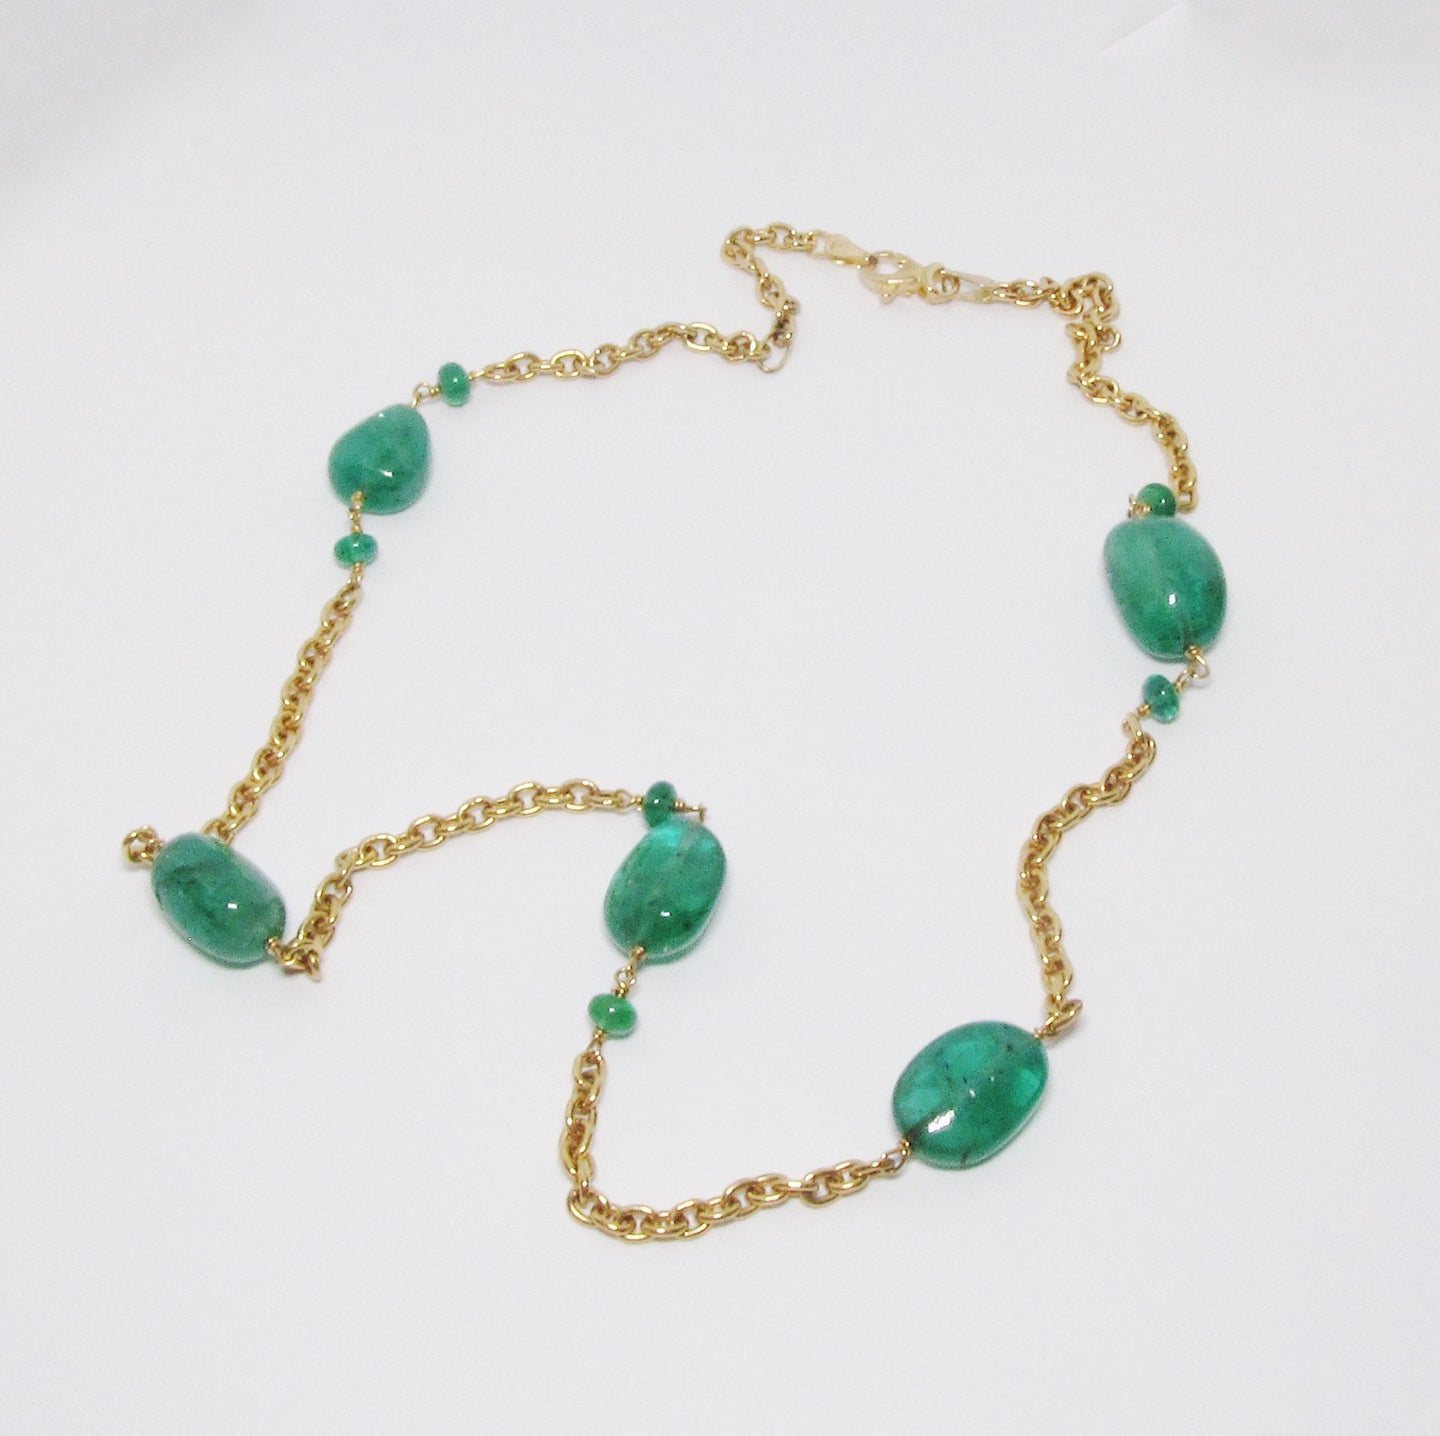 Emerald Beads Chain Necklace